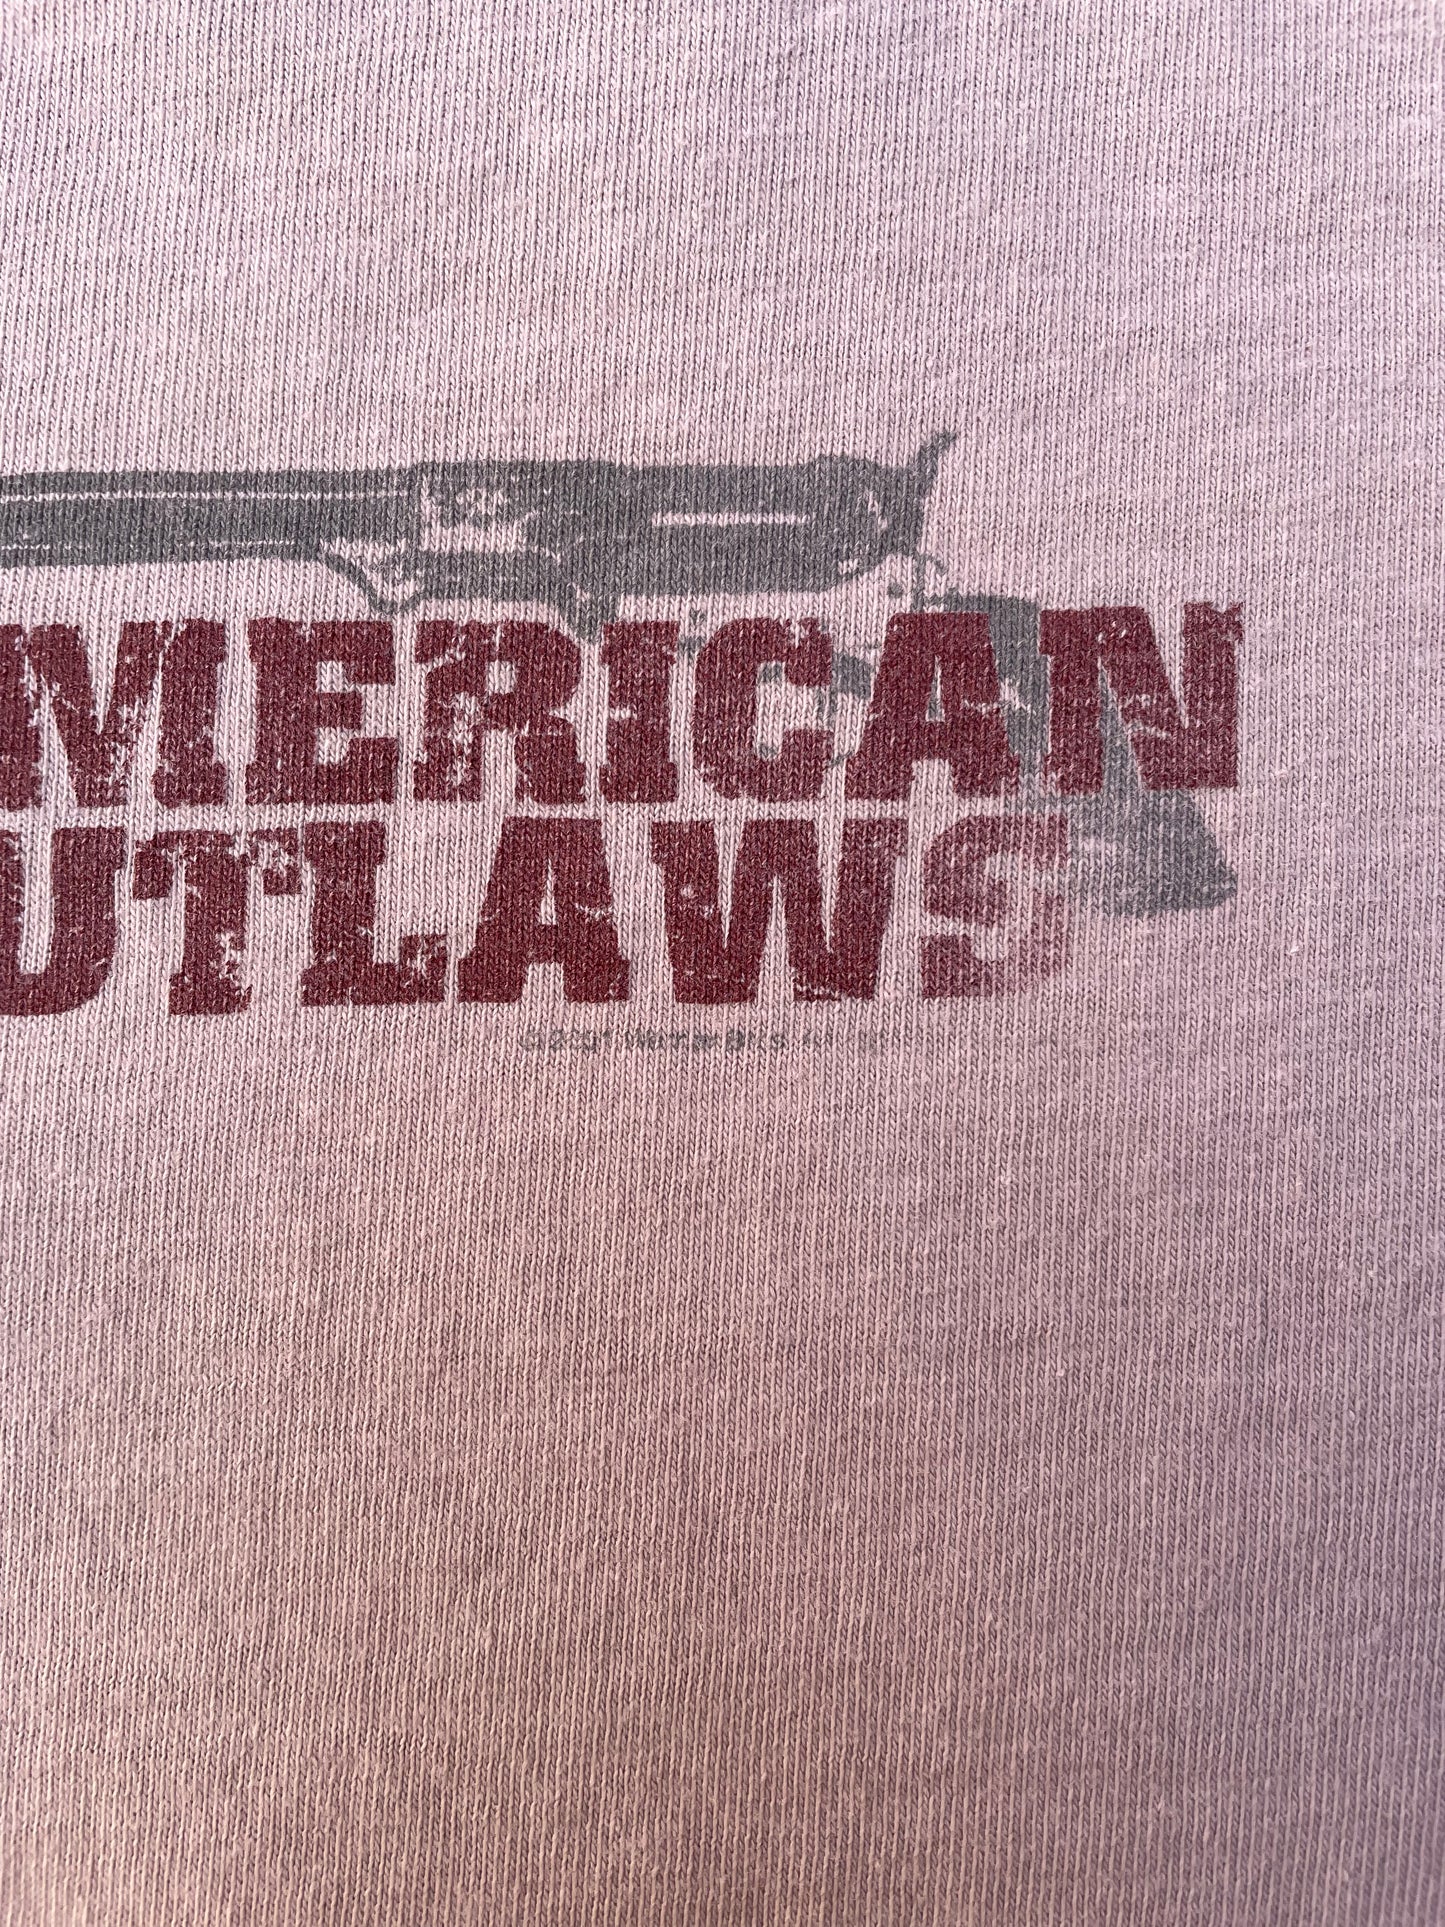 2001 American Outlaws Movie Promo Graphic T-Shirt - XL